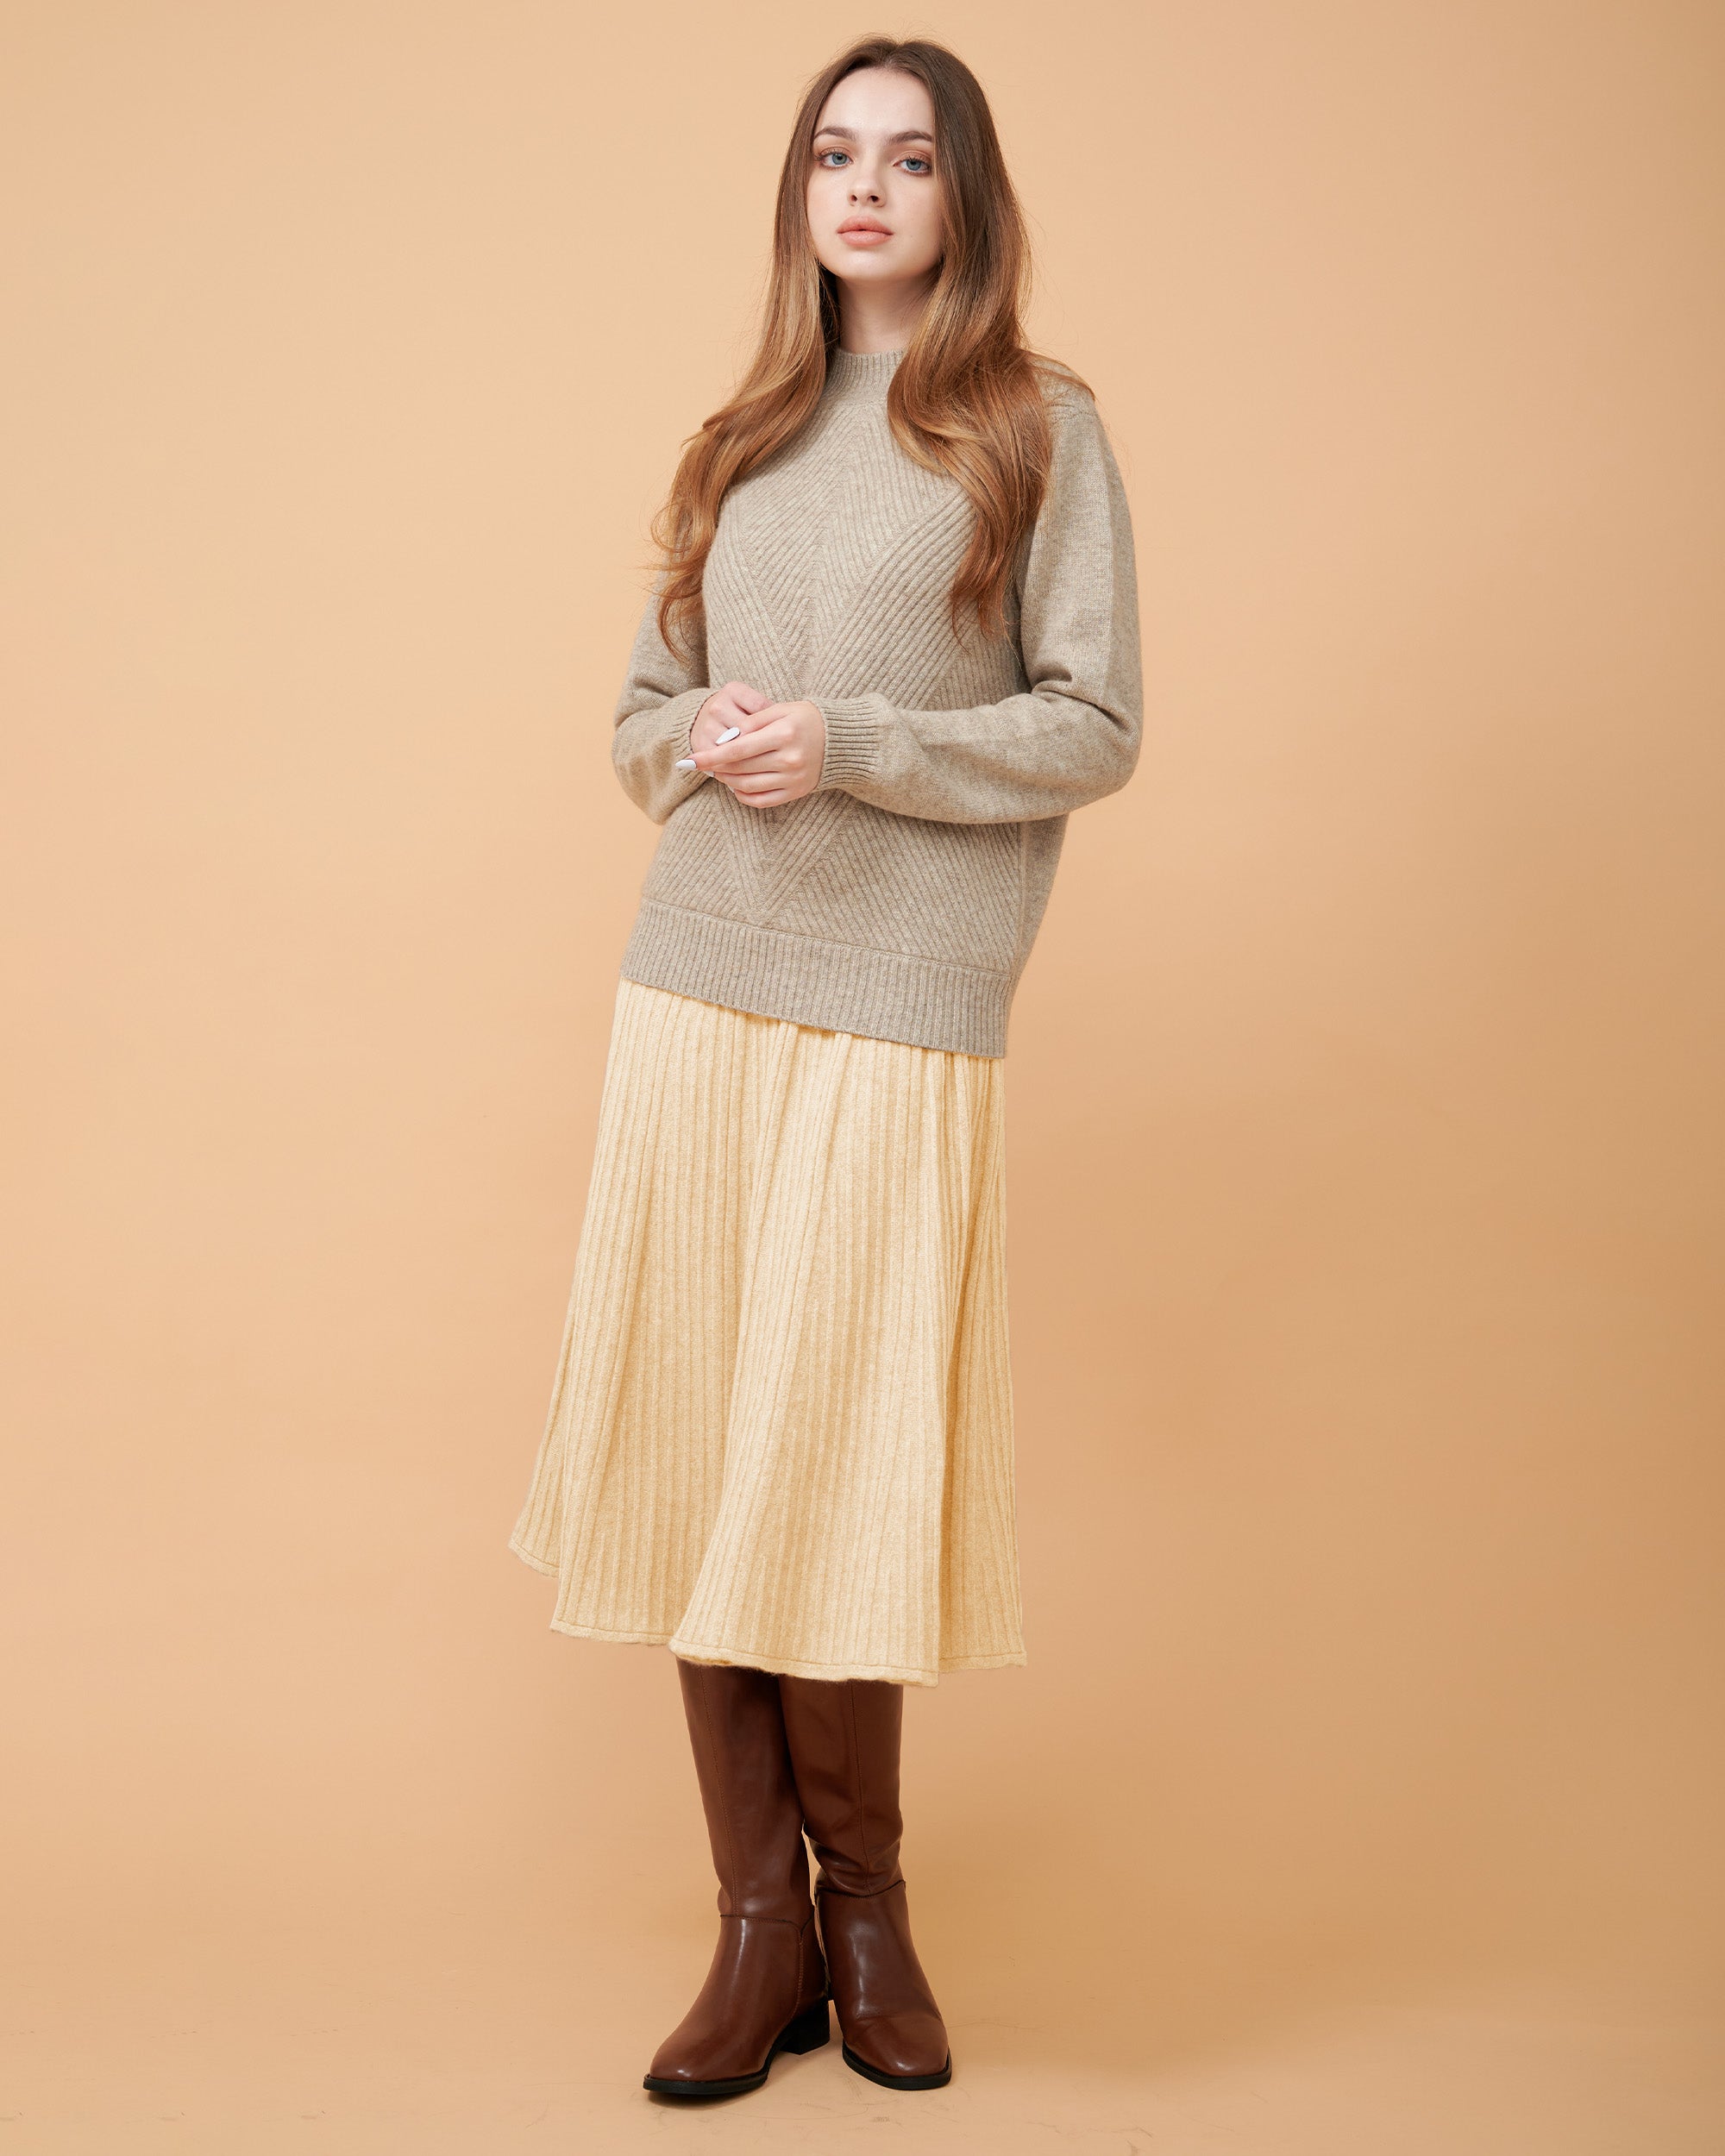 A woman wearing a creame cashmere midi skirt with pleats and a Cashmere sweater